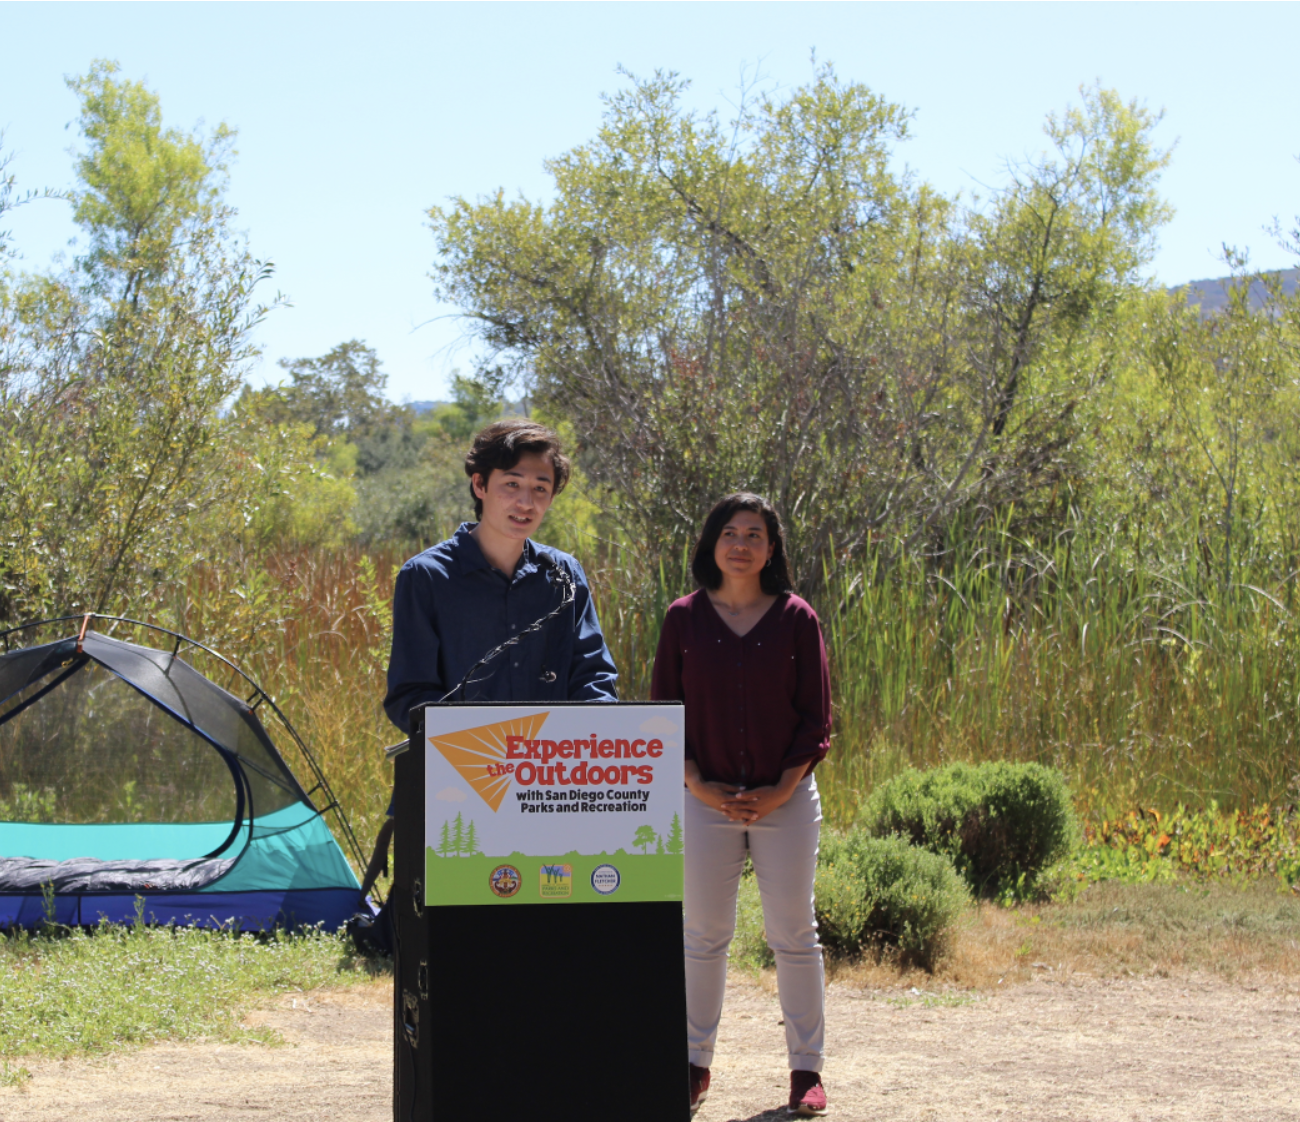 Keanu looking serious as he stands behind a podium while delivering a speech at the County of San Diego's launch of the "Experience the Outdoors" initiative.